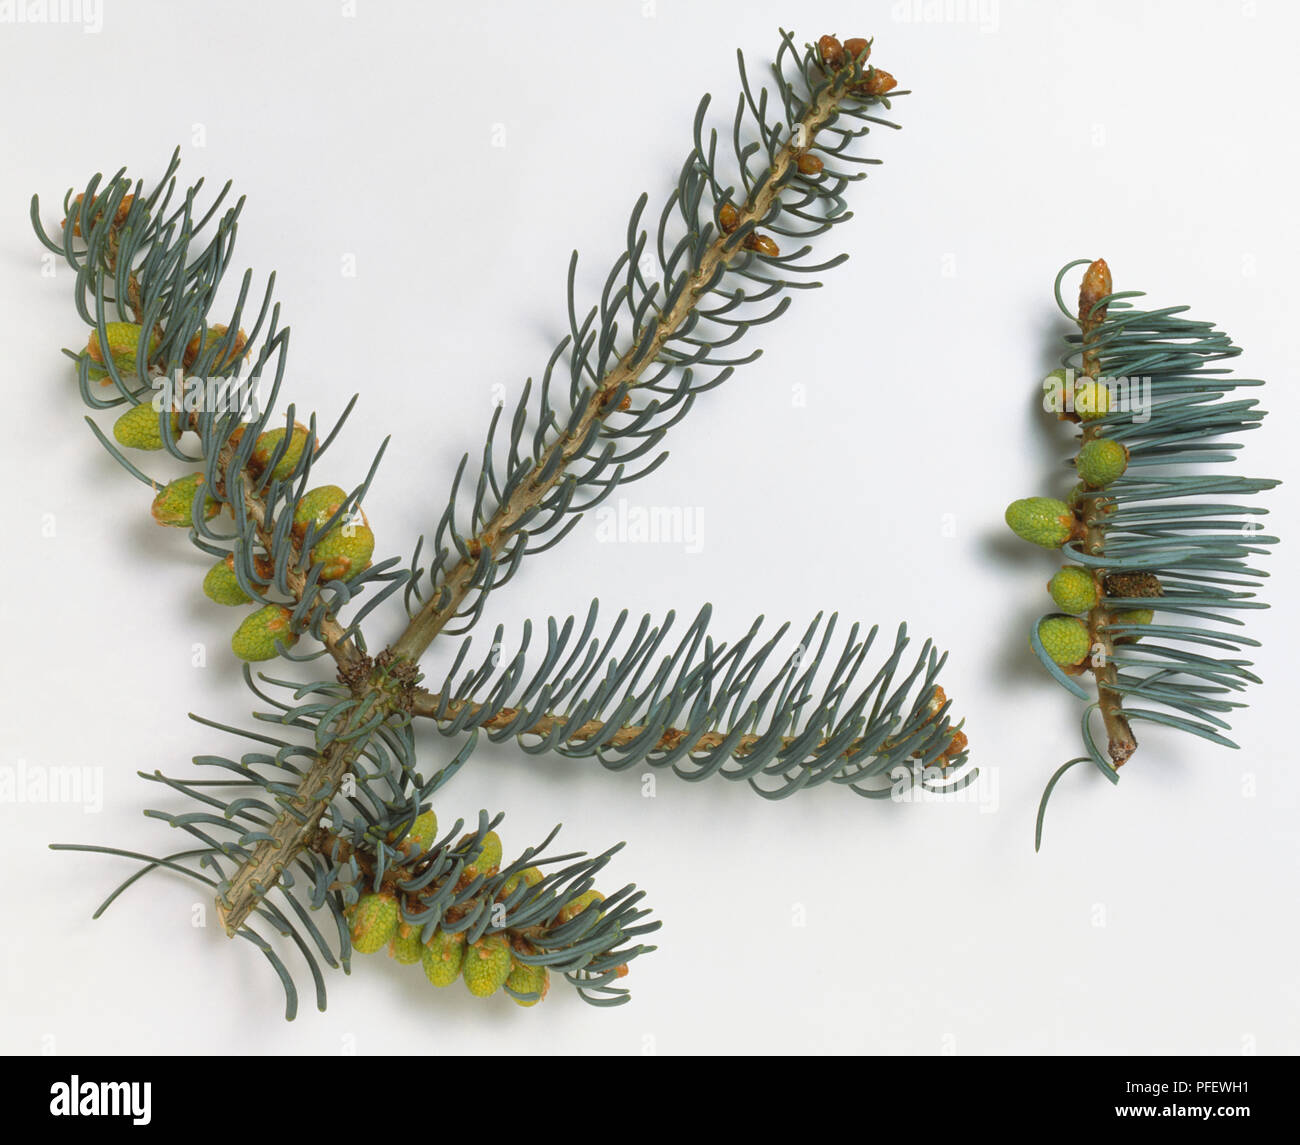 Pinaceae, Abies concolor, Colorado Fir, smooth grey branch with blue-tipped linear leaves, and male fruit clusters hanging under shoot. Stock Photo